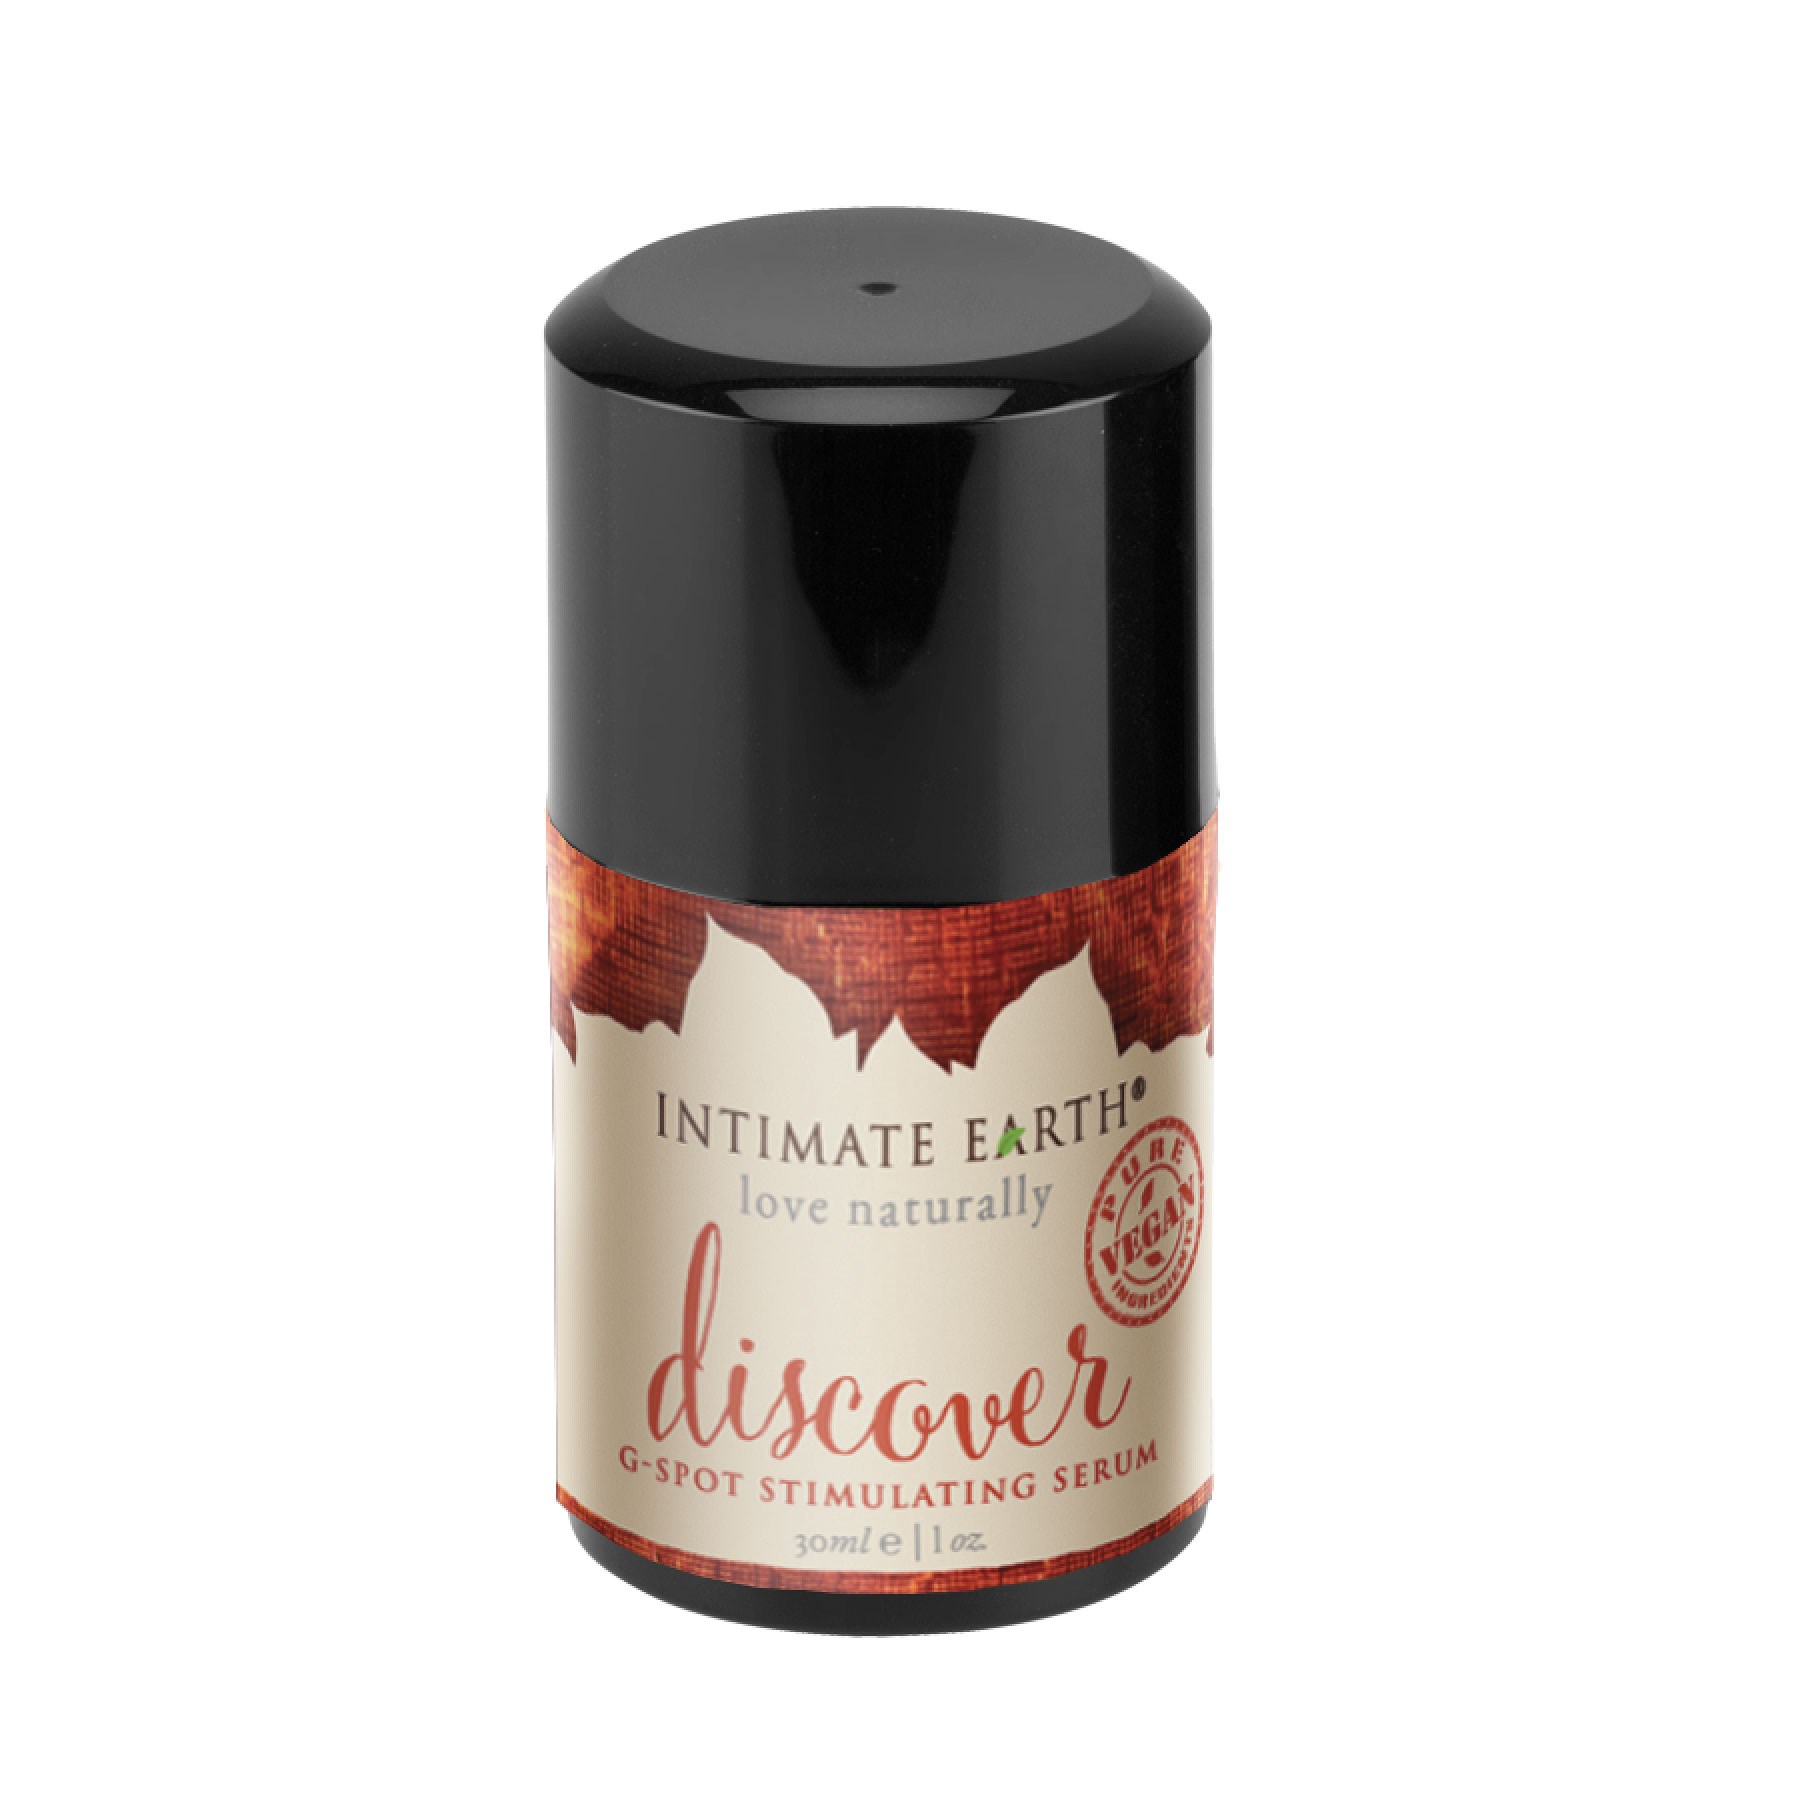 New Bottle Intimate Earth Discover G-Spot Gel